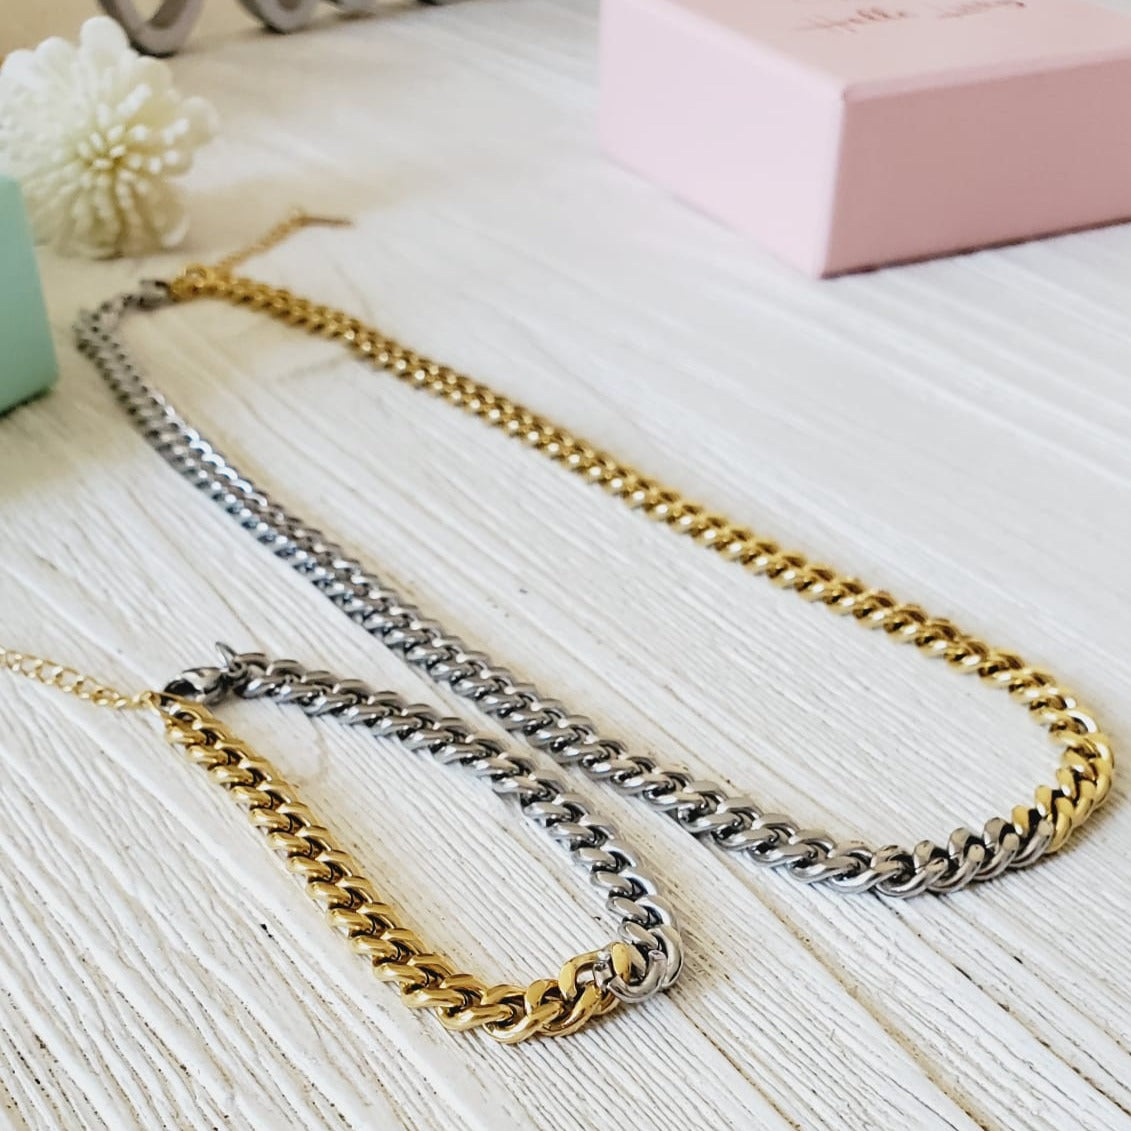 Minimalist chain, Double tone Chain, silver and gold Necklace, double tone cuban Chain, Water resistant jewelry, water resistant Necklace, Water resistant bracelet, vintage jewelry, vintage jewelry, vintage necklace, 14k gold necklace, 14k gold jewelry, 14k gold necklace, fine jewelry, fine necklace, fine bracelet, 6mm gold and silver chain, bold necklace, bold jewelry, handmade jewelry, fine jewelry brand, hello luxy, joyeria fina, 18k gold plated chain, 18k gold plated jewelry, gift for her